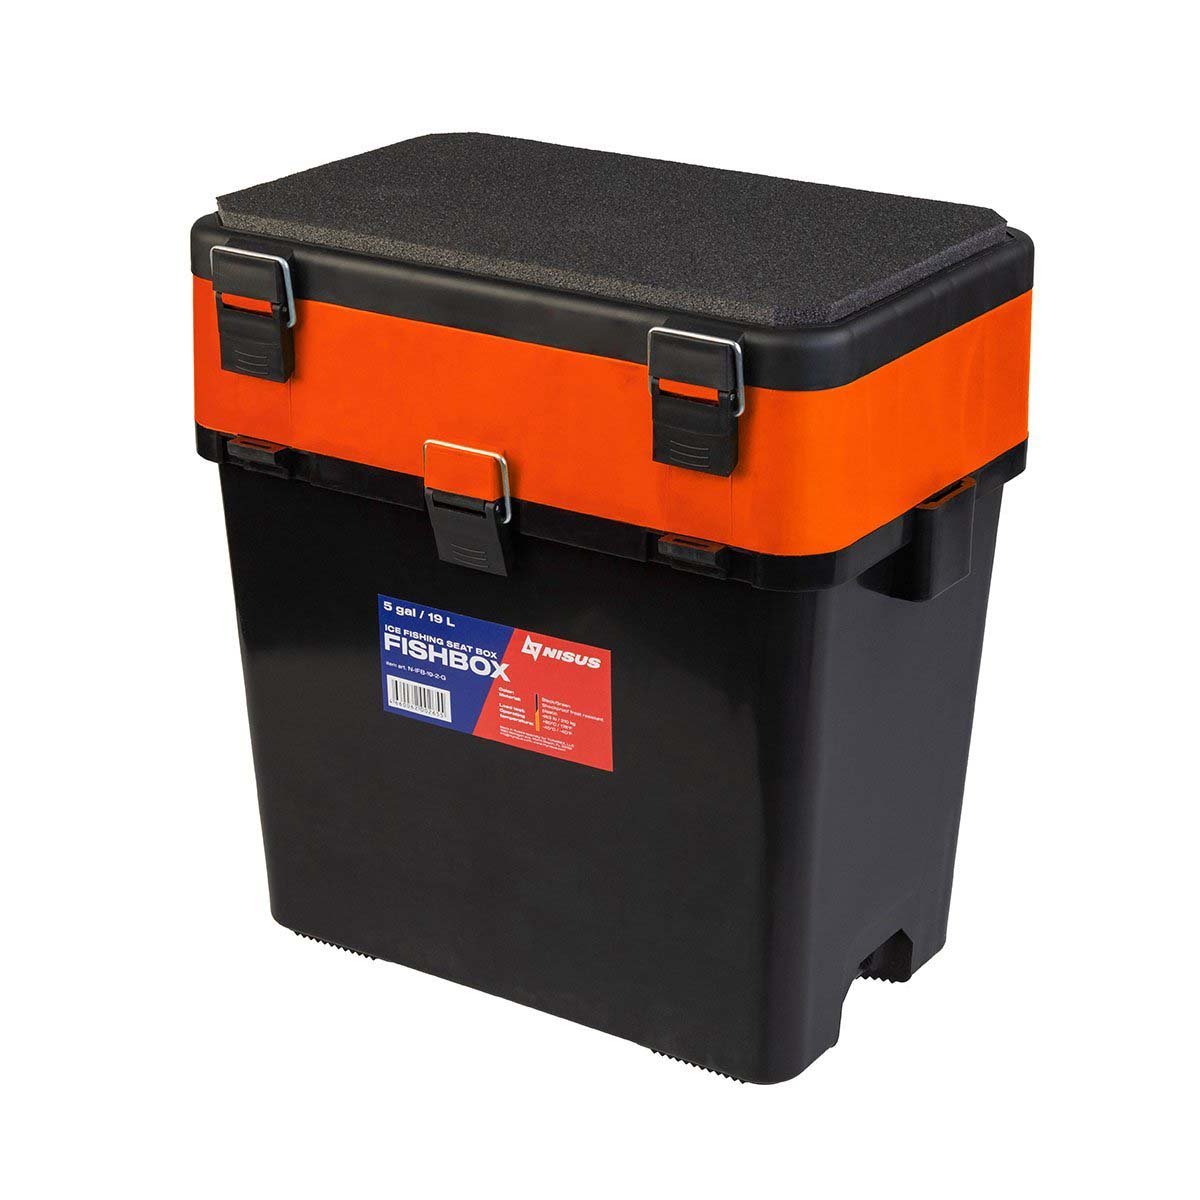 FishBox Large 5 gal Box for Ice Fishing, 2 Compartments